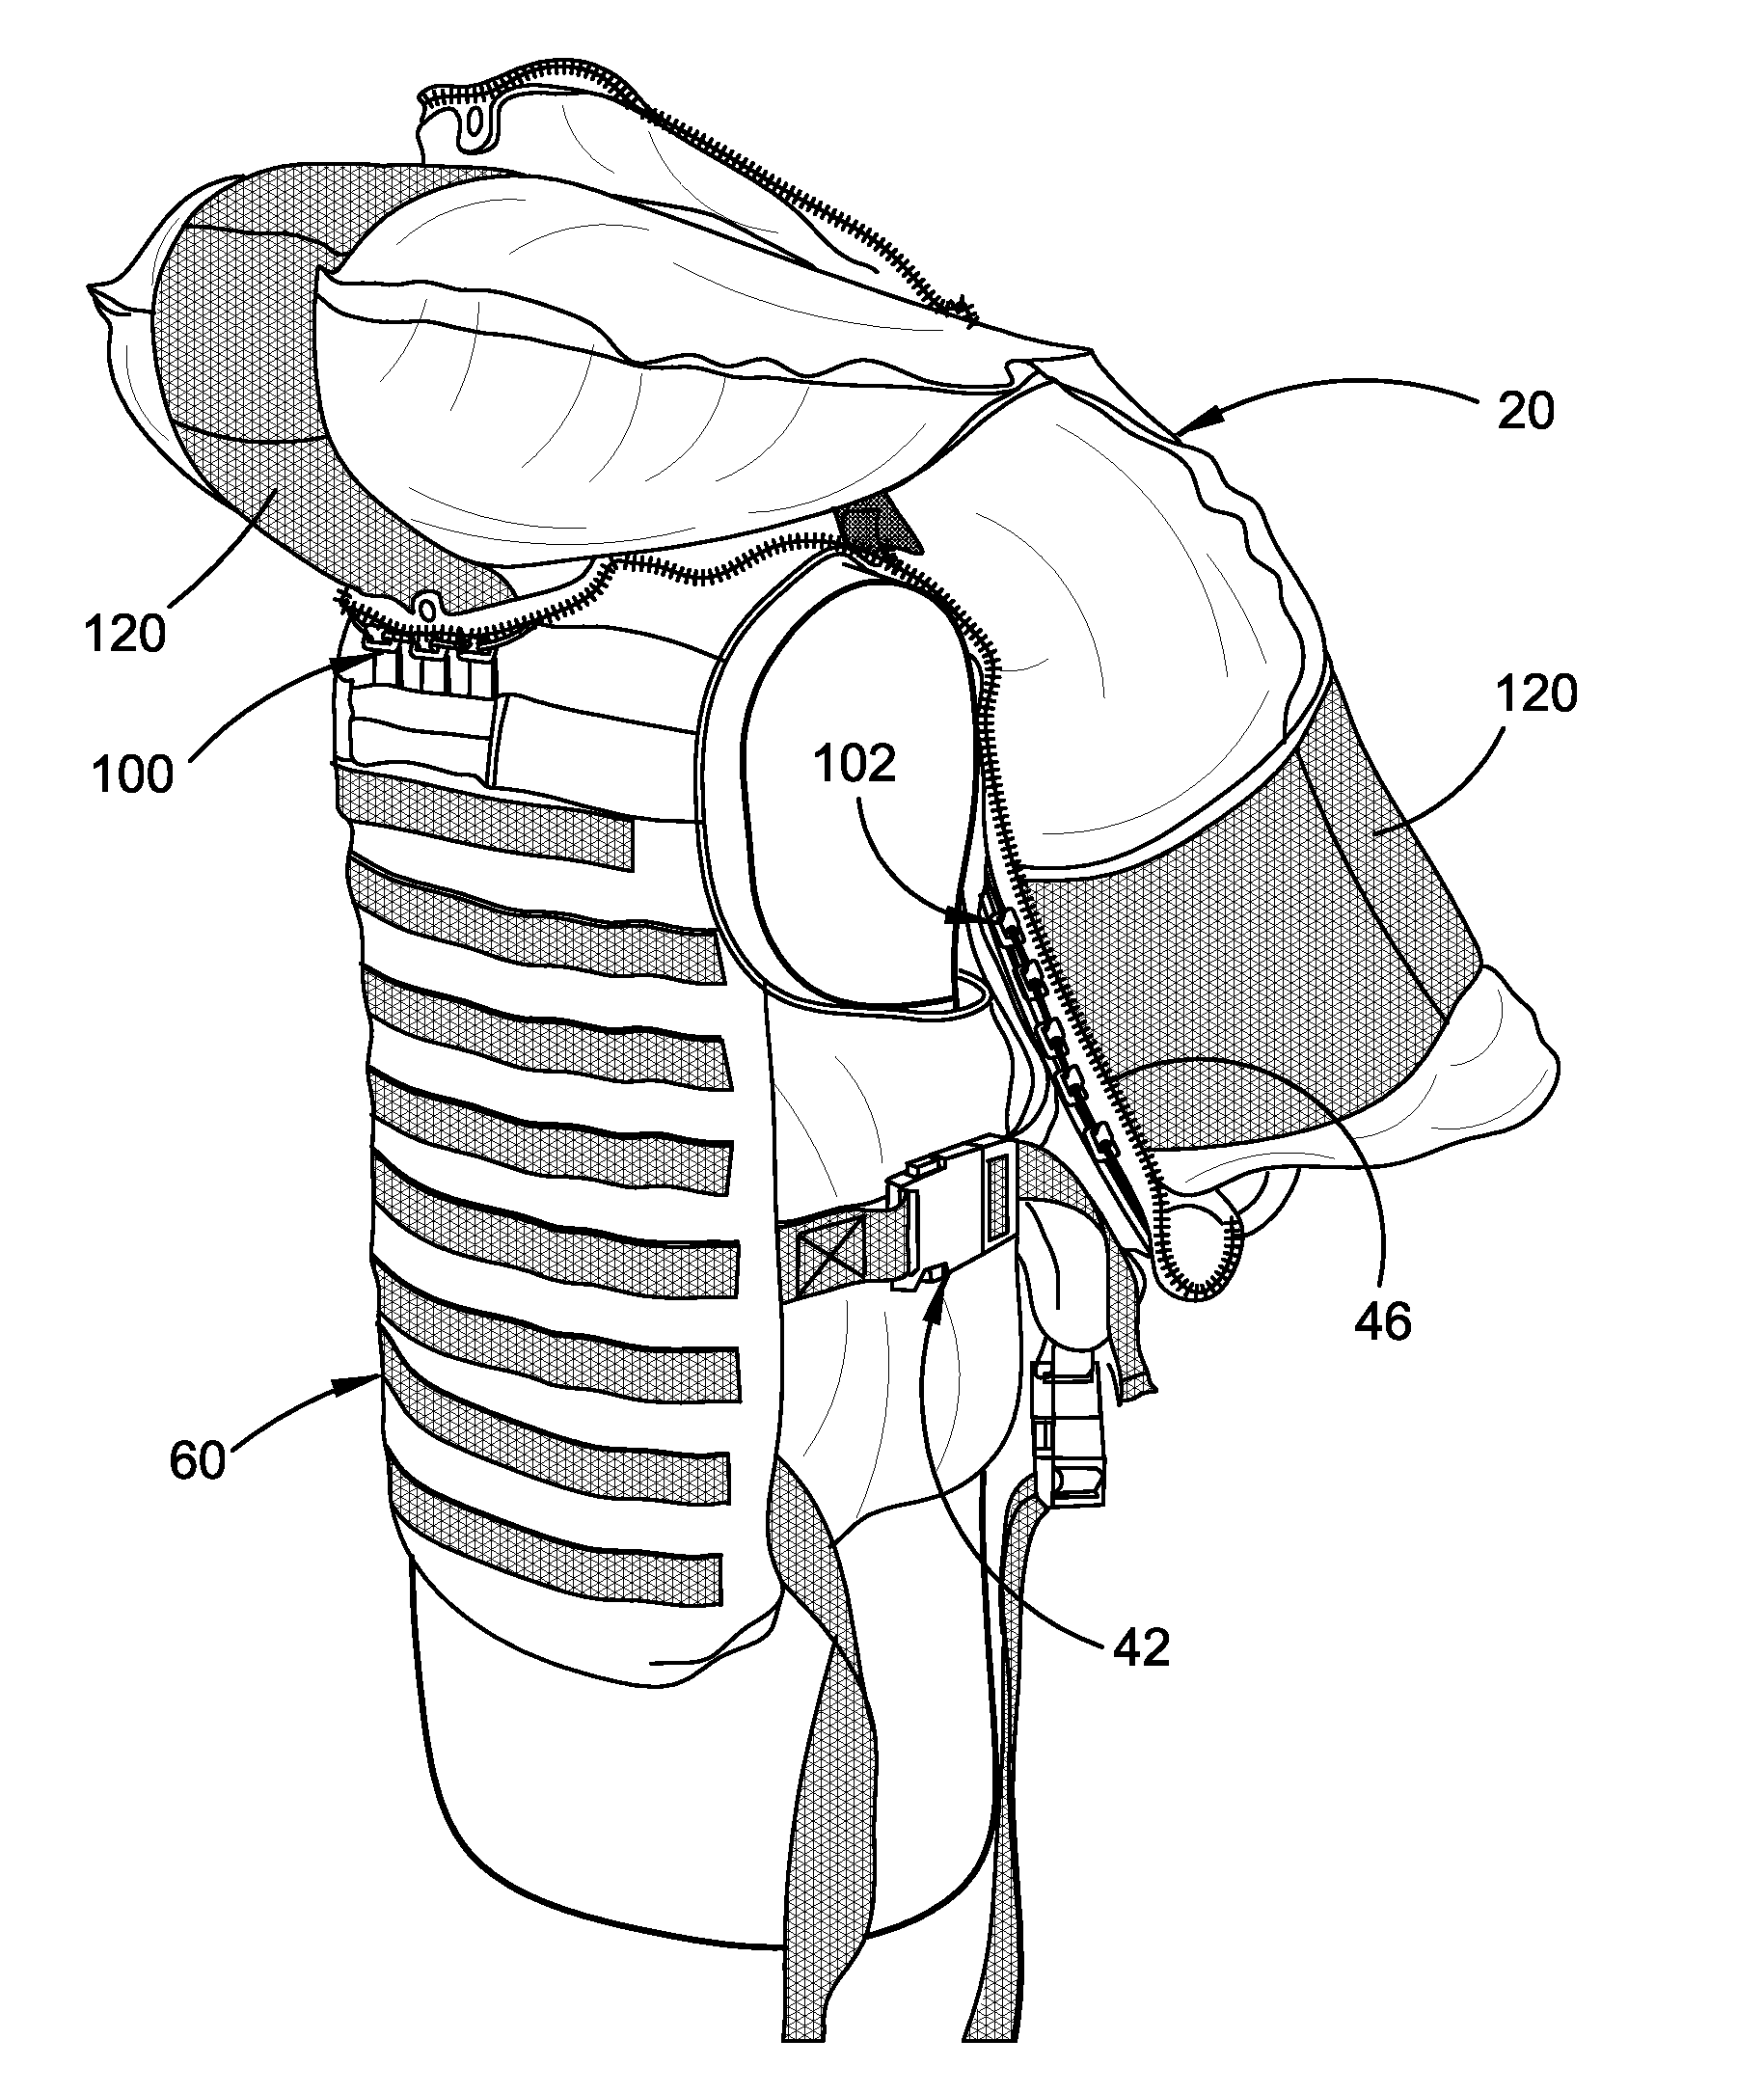 Personal protection system including a garment with body armour and a personal flotation device